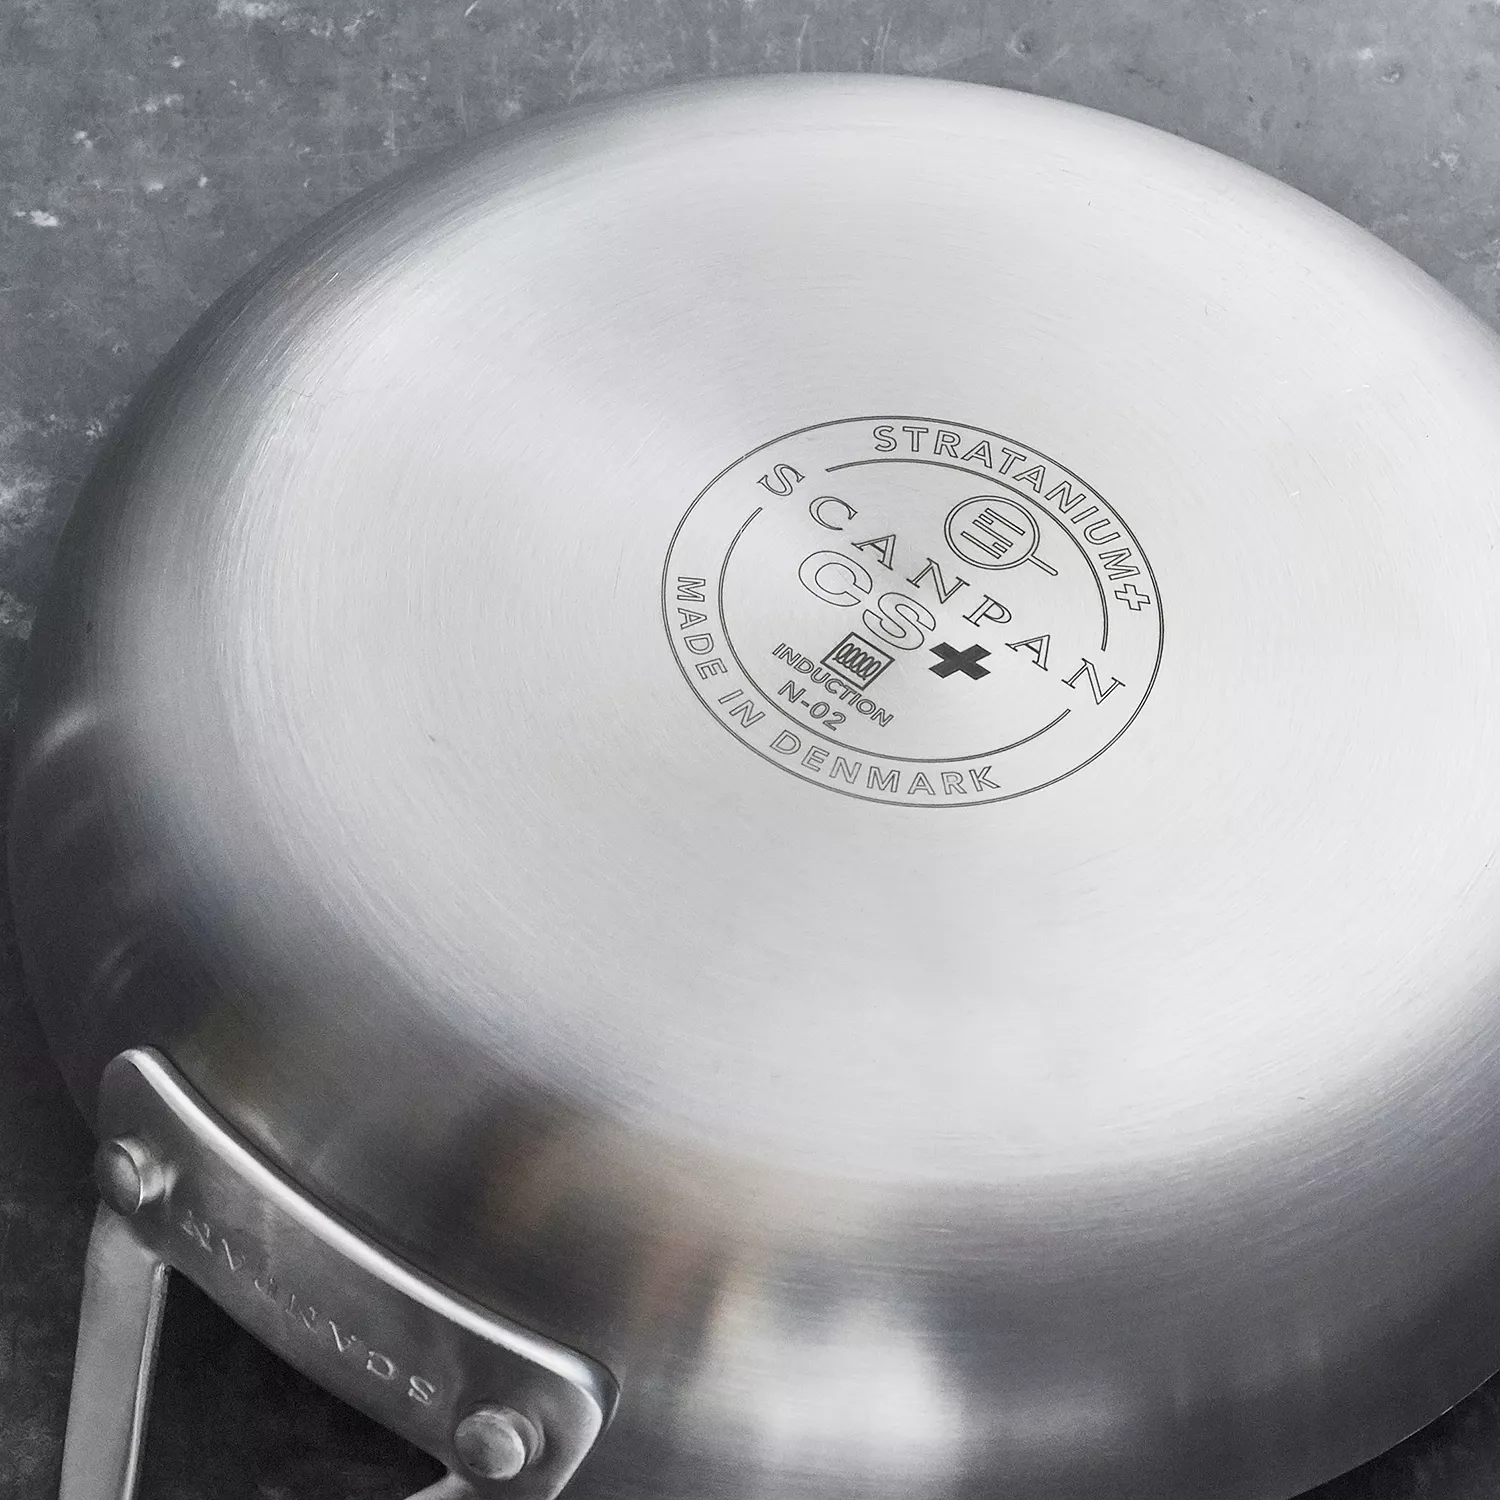 Met Lux 7.5 qt Stainless Steel Sauce Pan - Induction Ready, Dual Handle - 1  count box